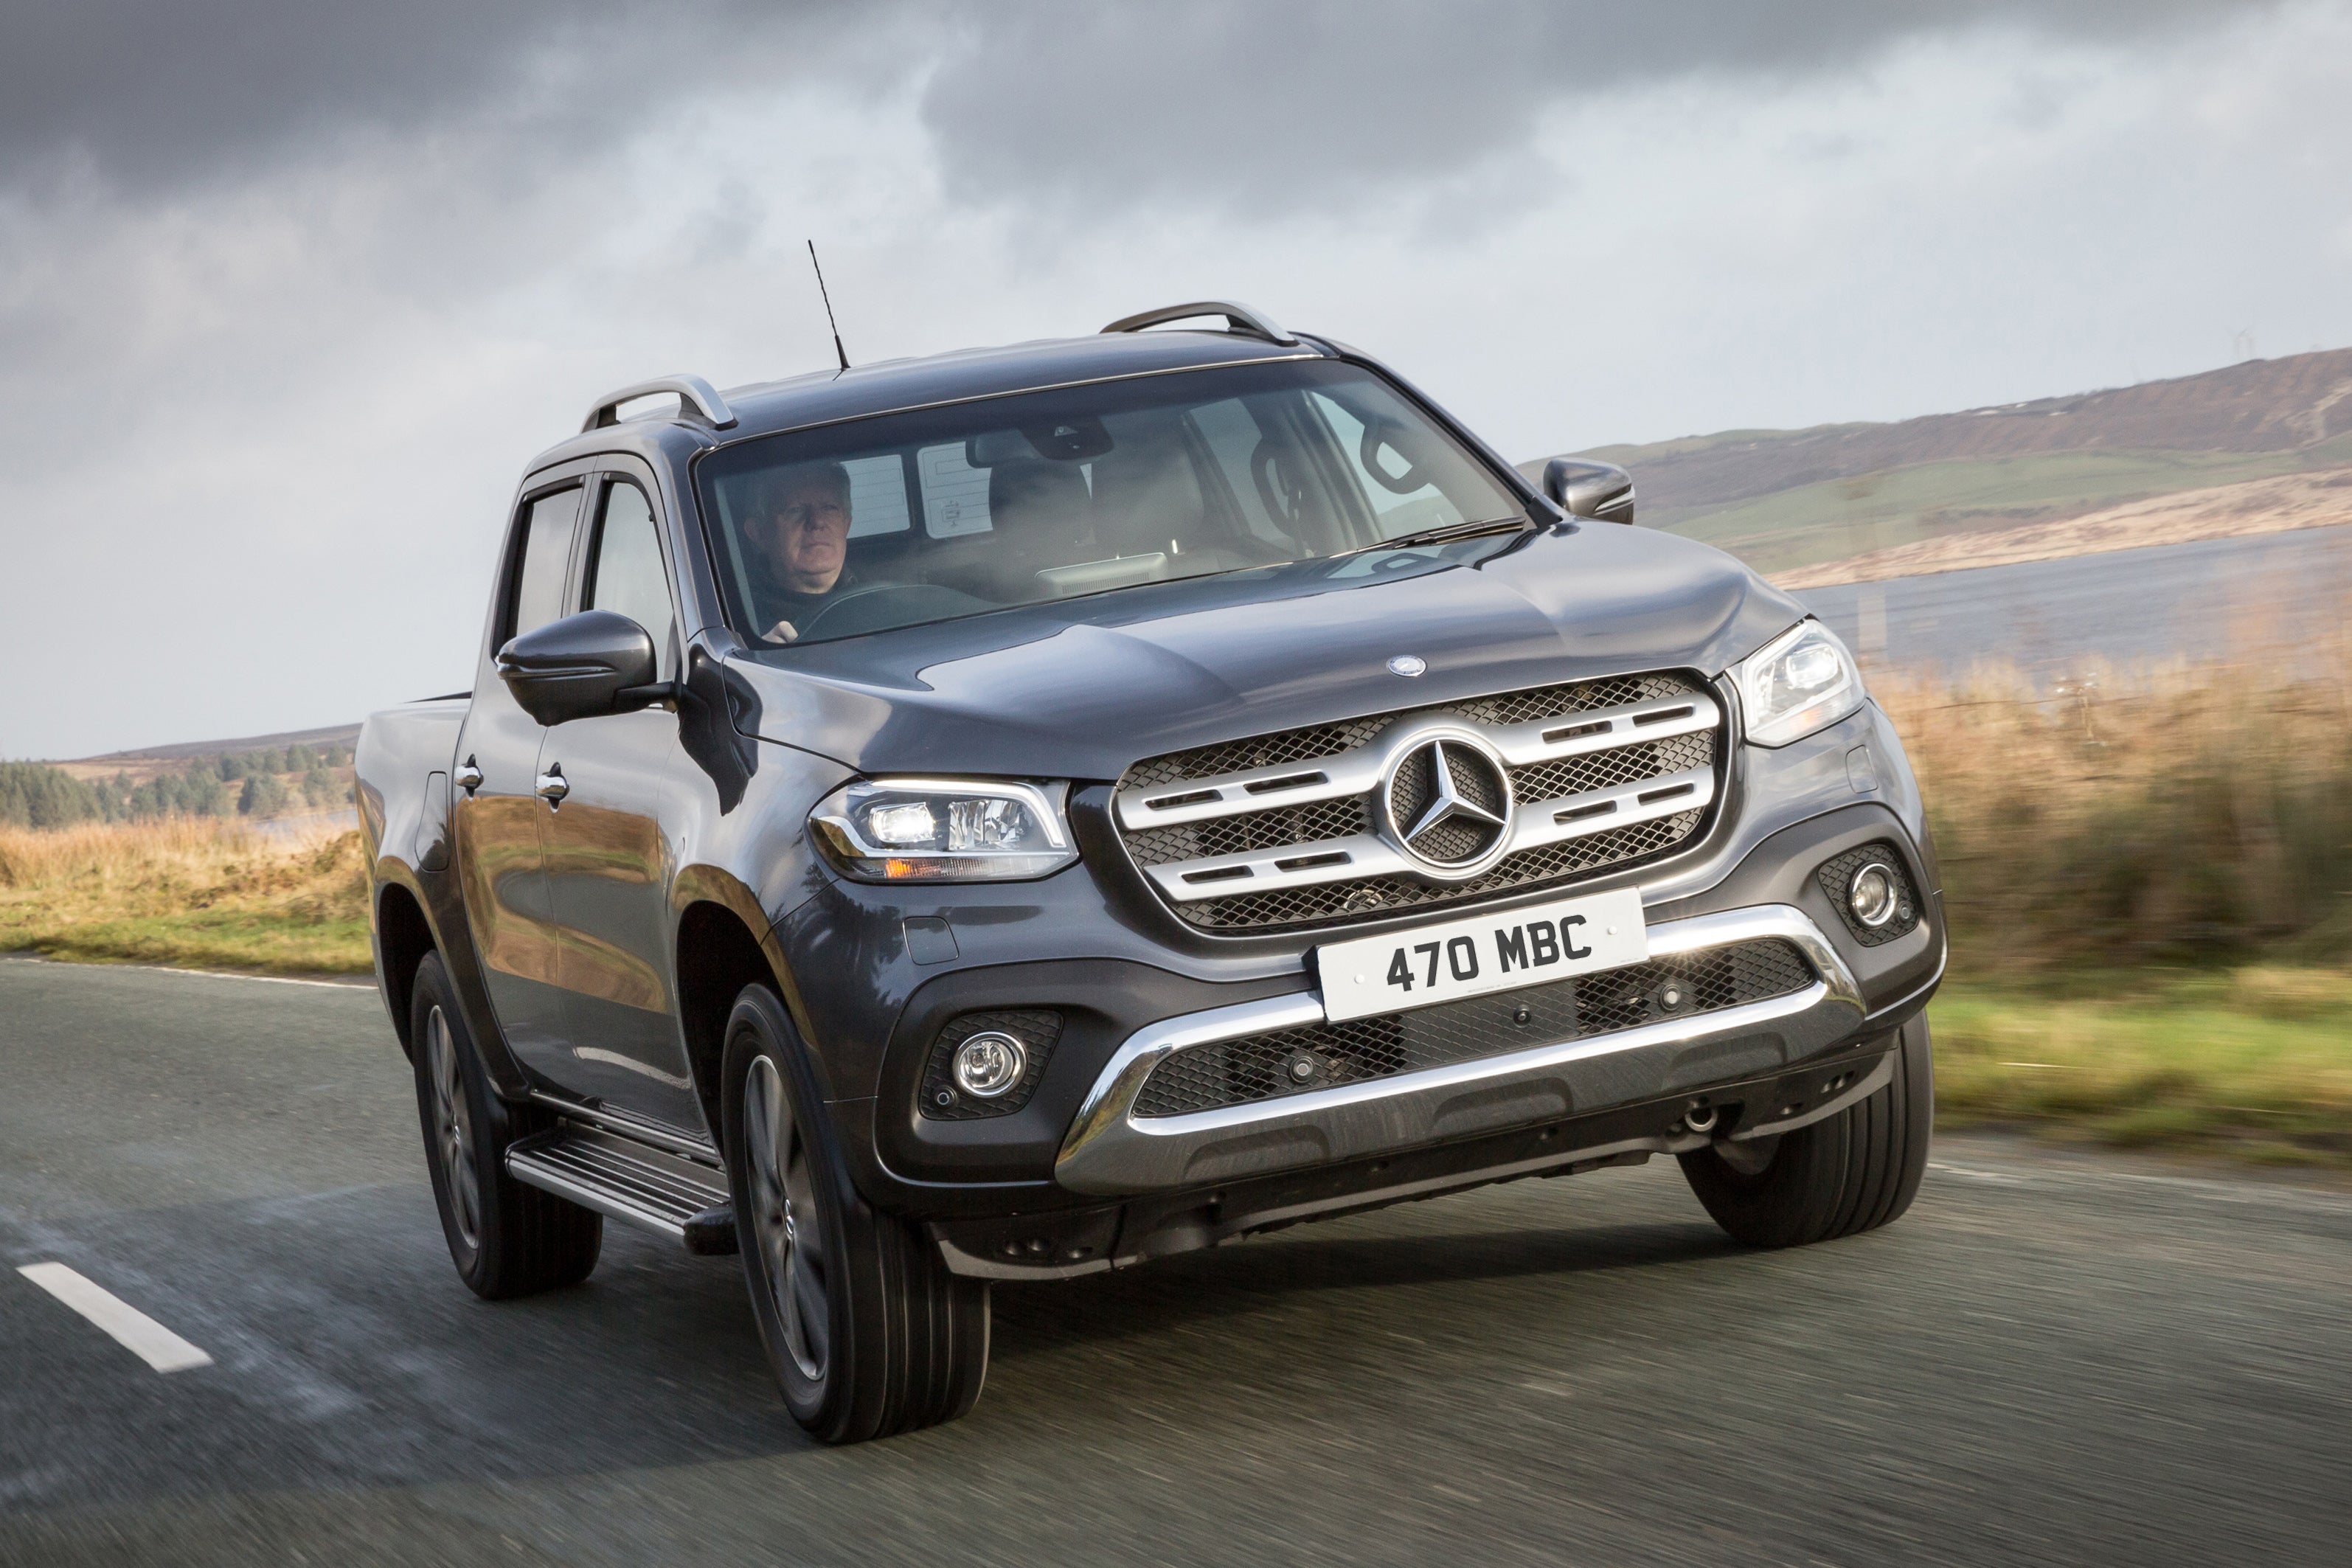 Mercedes-Benz X-Class (2017-2020) Review: exterior front three quarter photo of the Mercedes-Benz X-Class on the road